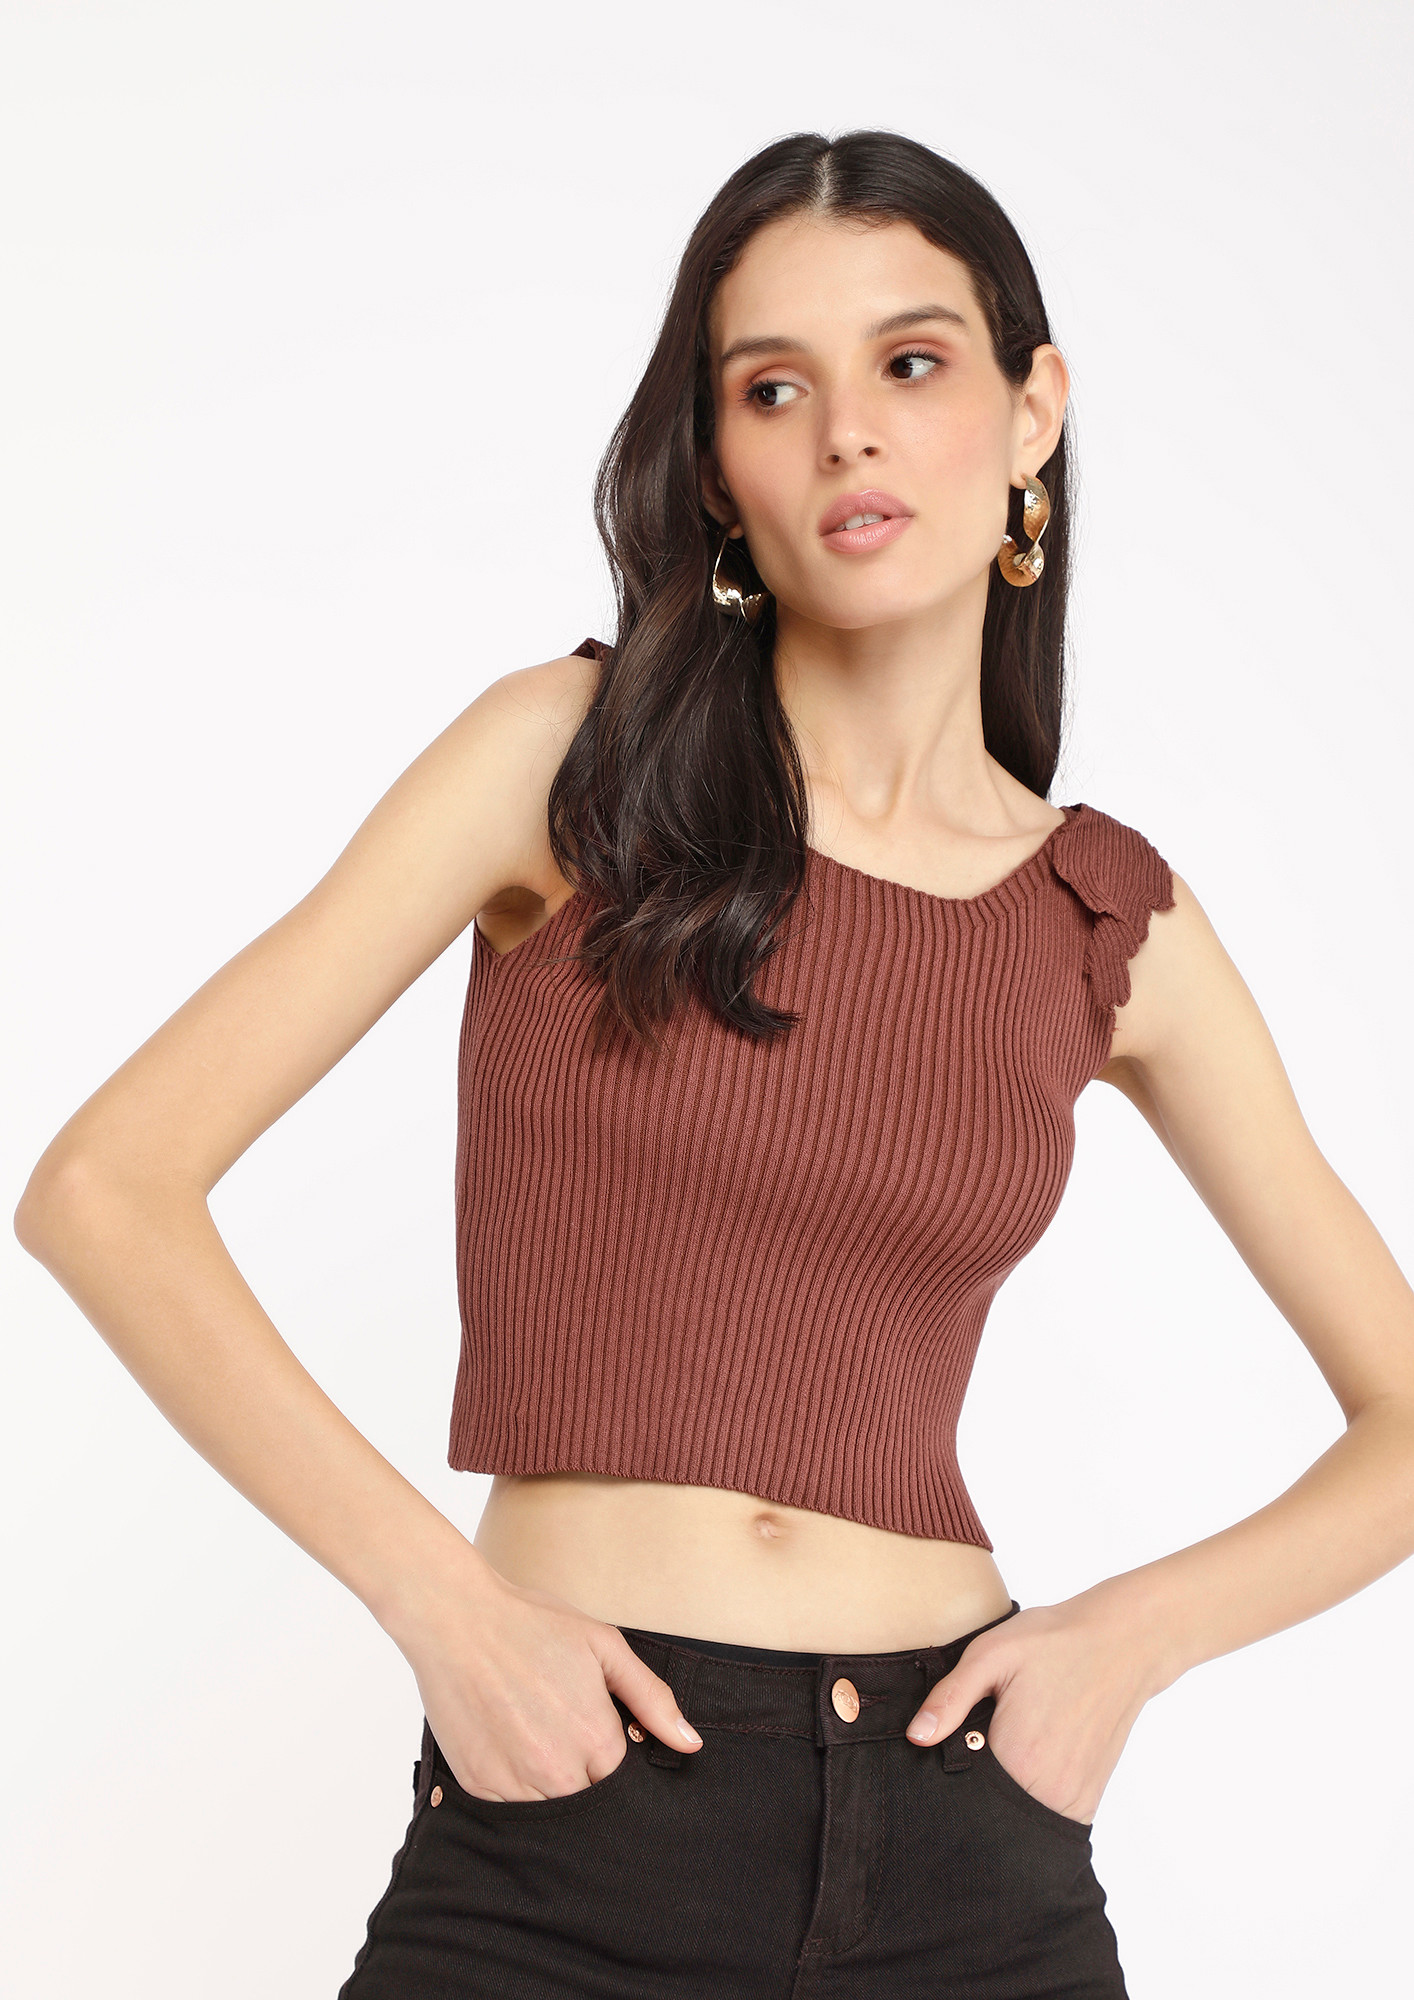 IN FRILL EDGED SLEEVELESS BROWN CROP TOP